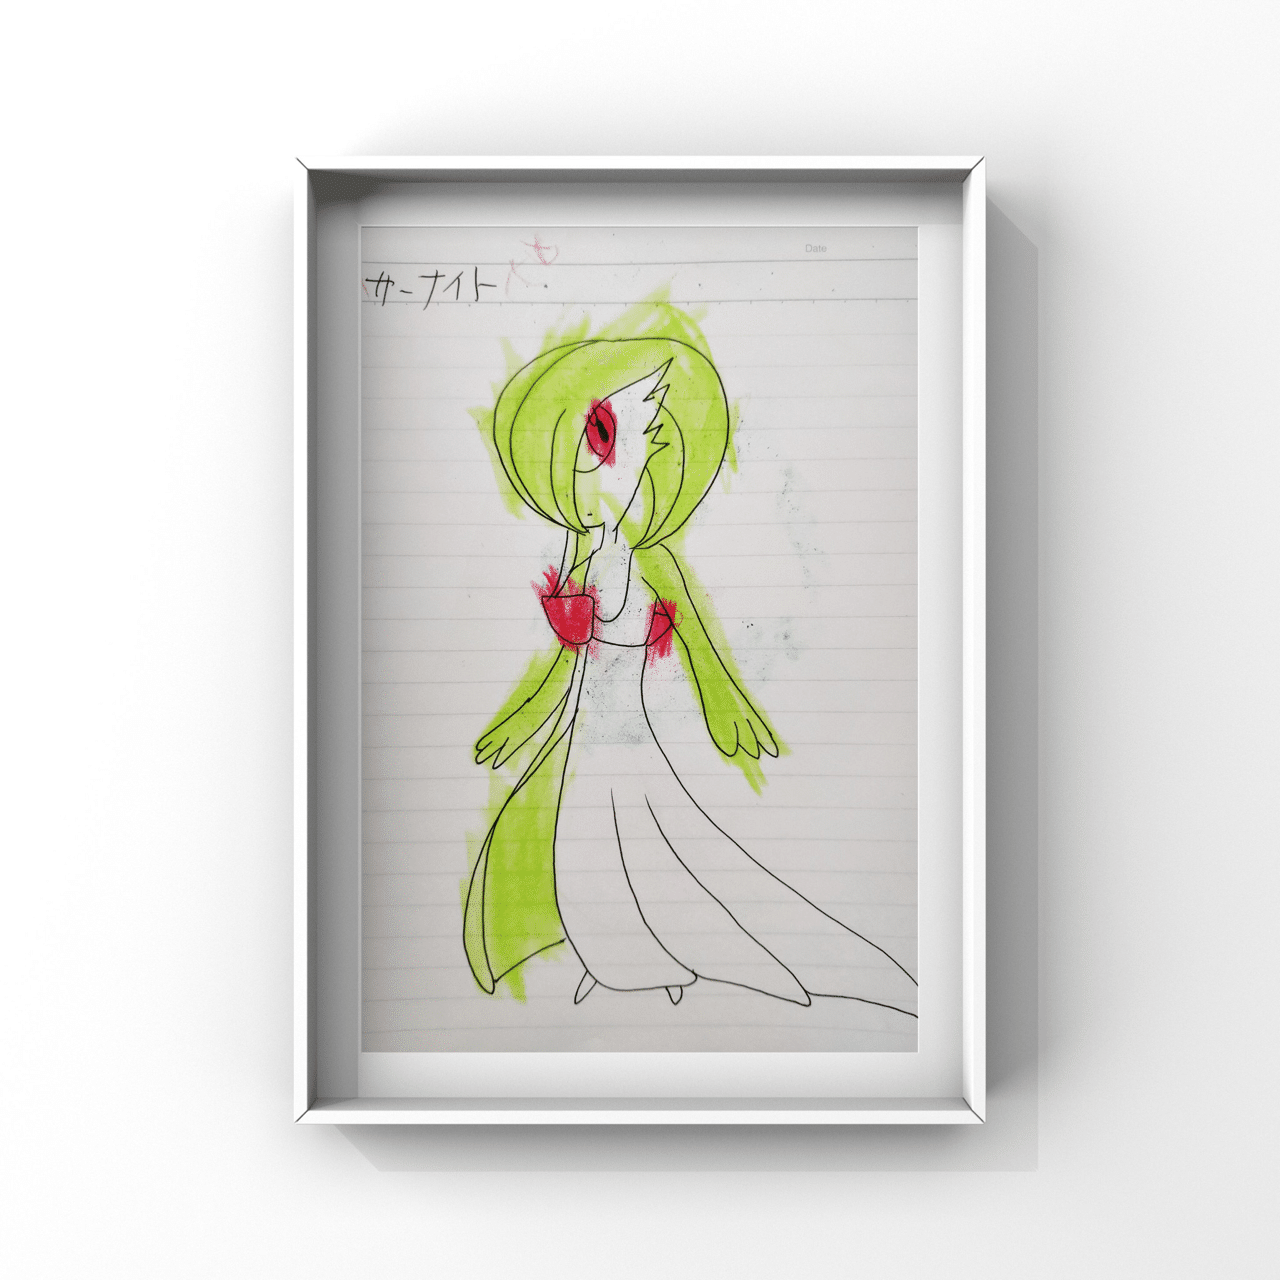 Tmy ポケモン塗り絵展 Snic Kmd Note